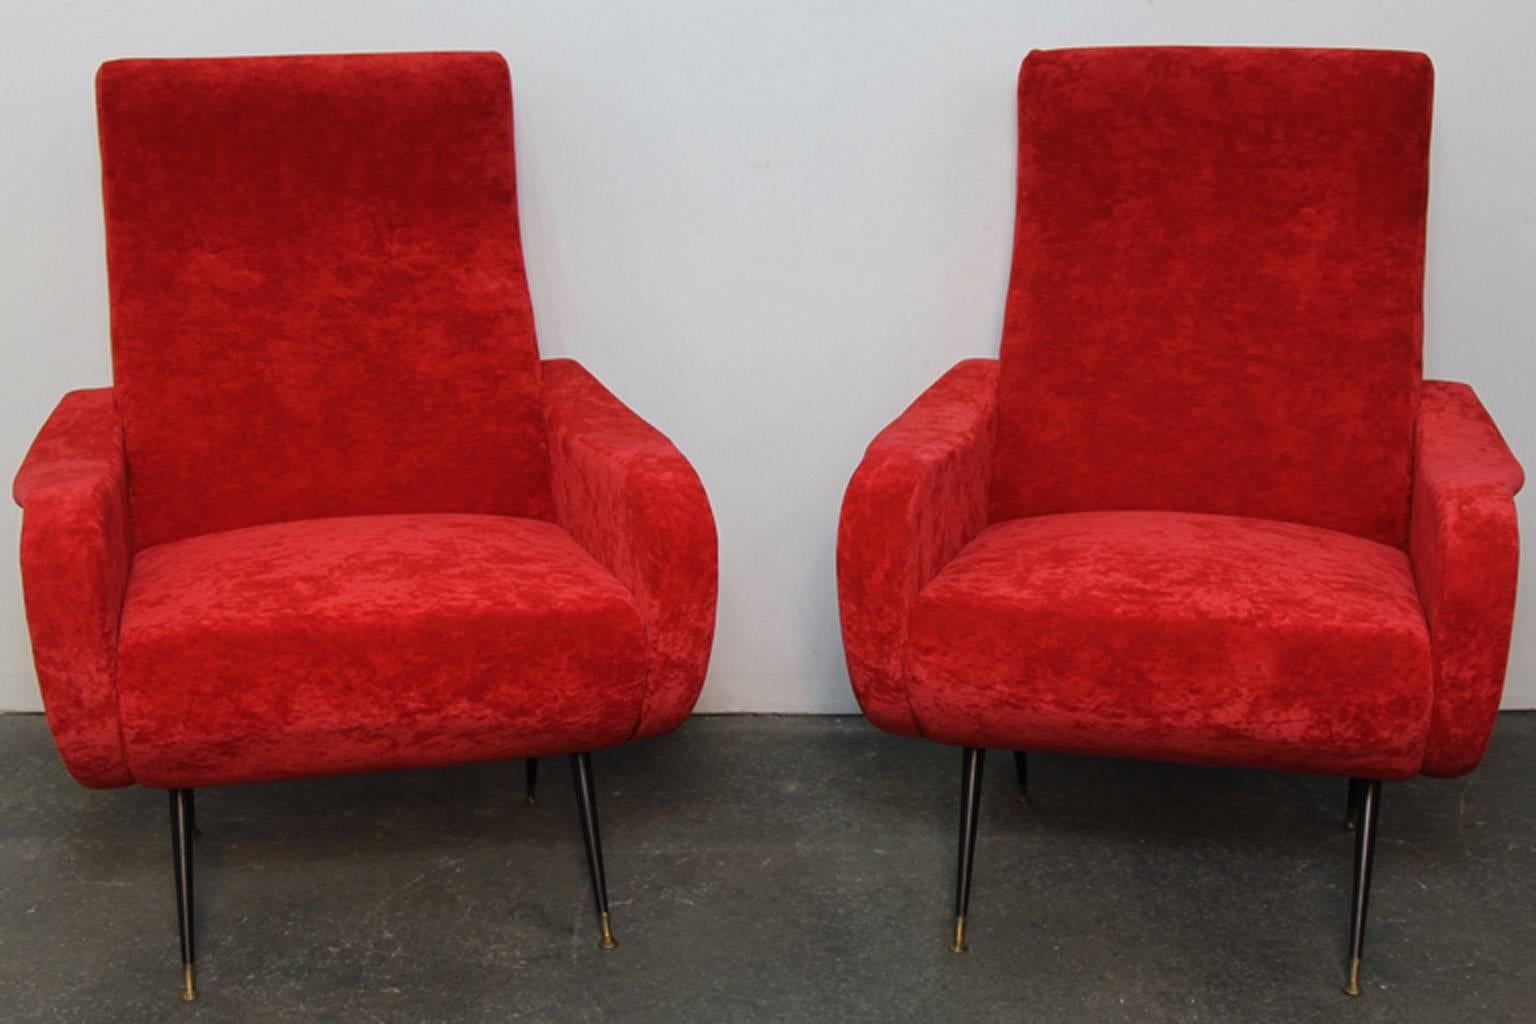 Italian style club chairs with crushed red velvet upholstery. Enabled steel legs with brass detail. Excellent condition, Italian style, in contemporary chairs.